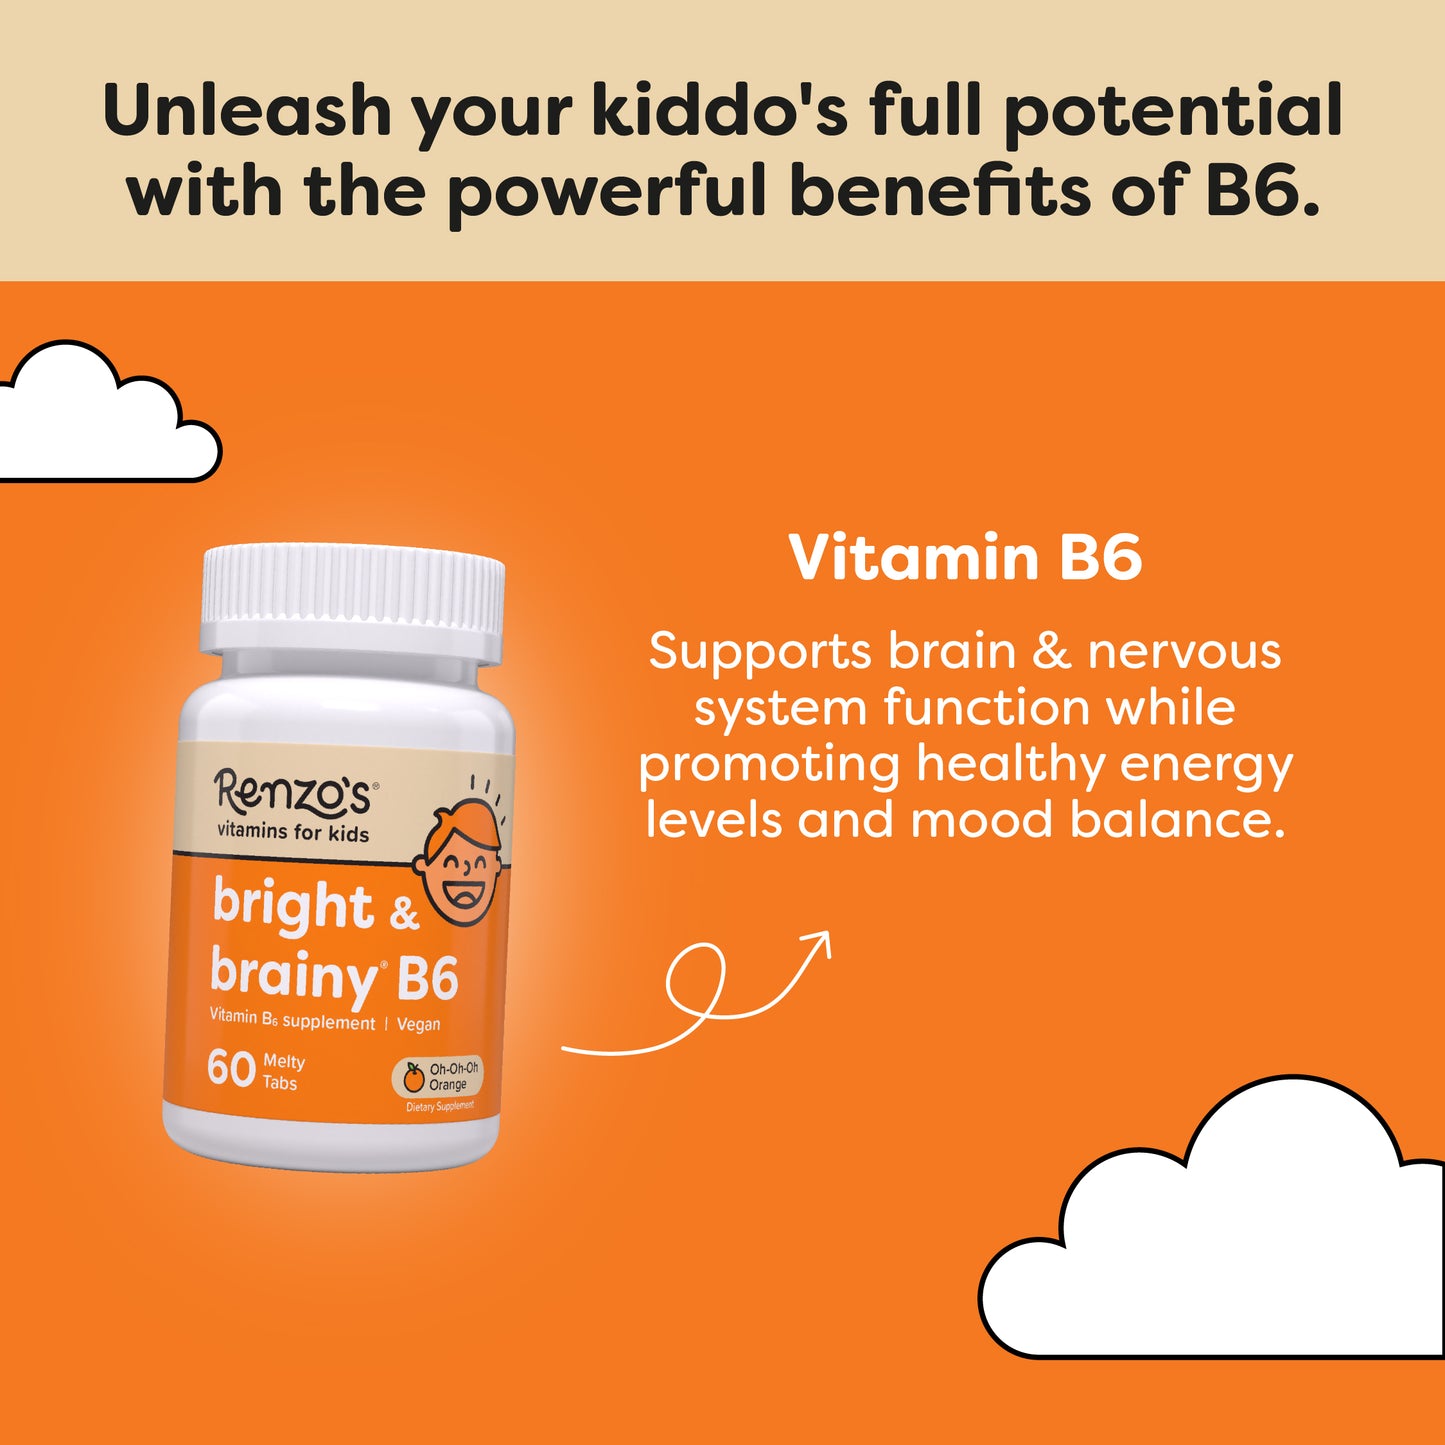 Renzo's Bright & Brainy B6 Bottle and product benefits. Product contains a vegan form of Vitamin b6 for kids. 